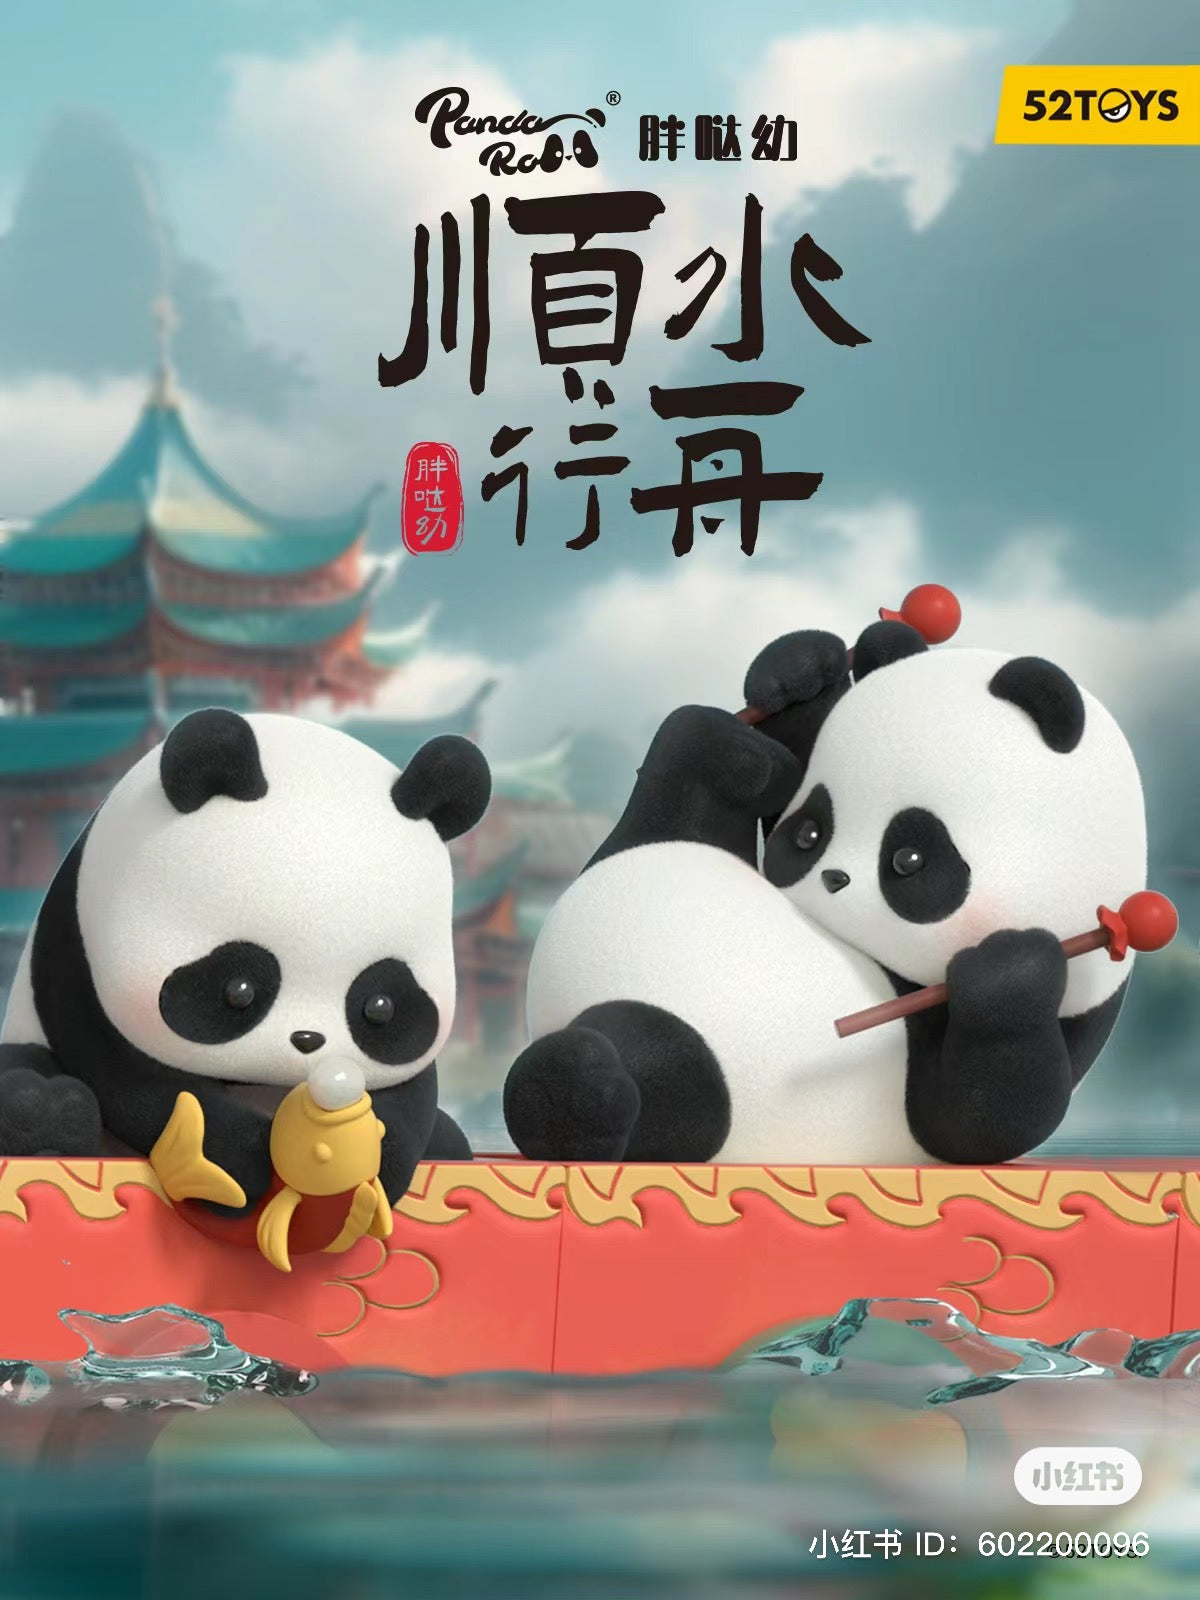 A blind box series featuring Panda Roll- Row a Dragon Boat, with pandas in a boat and a cartoon panda holding a stick. From Strangecat Toys.